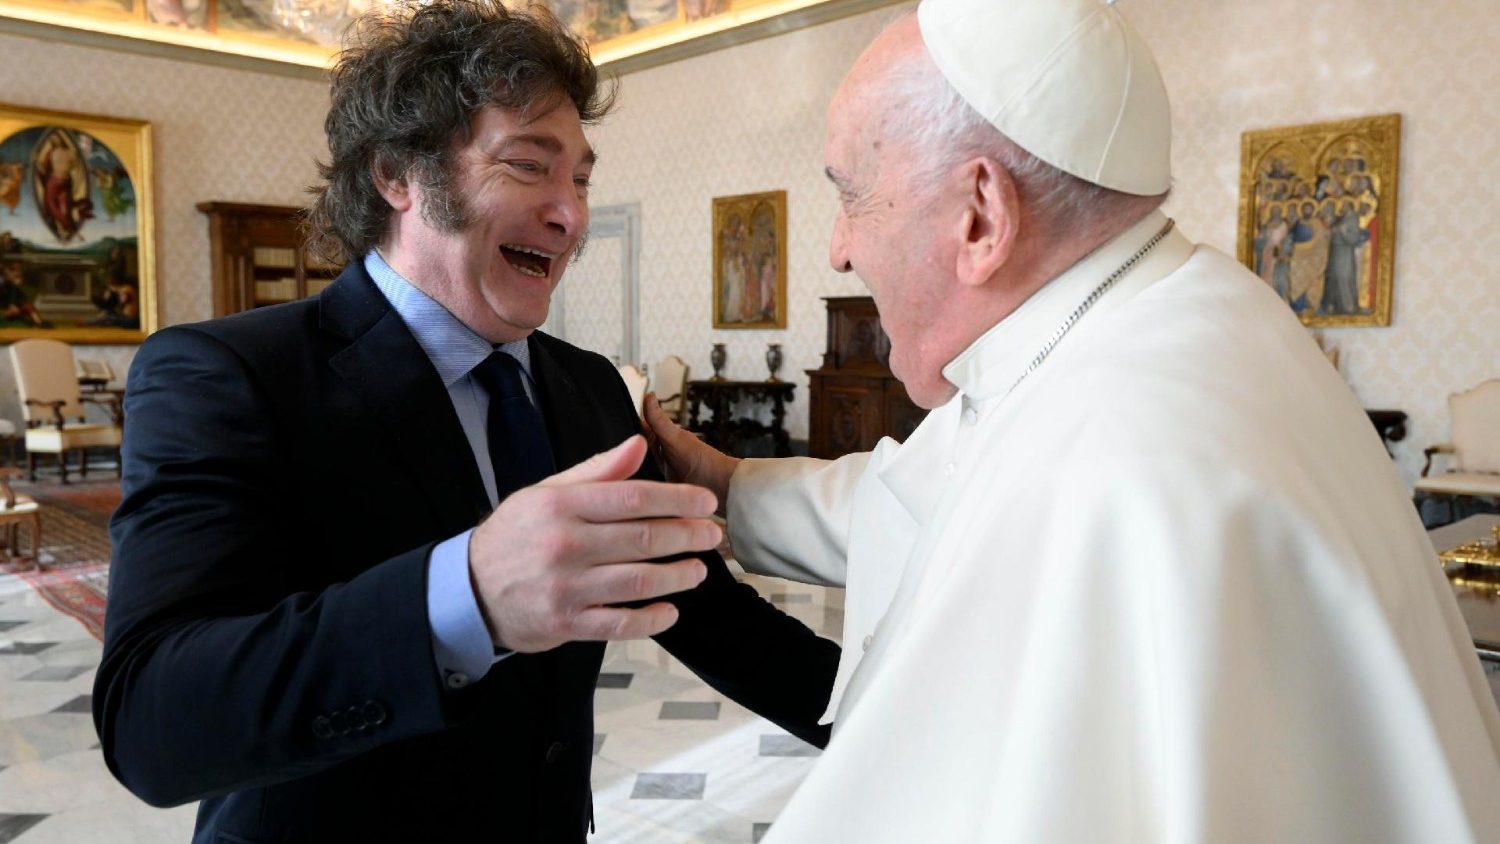 Pope Francis' meeting with Argentine President Miley